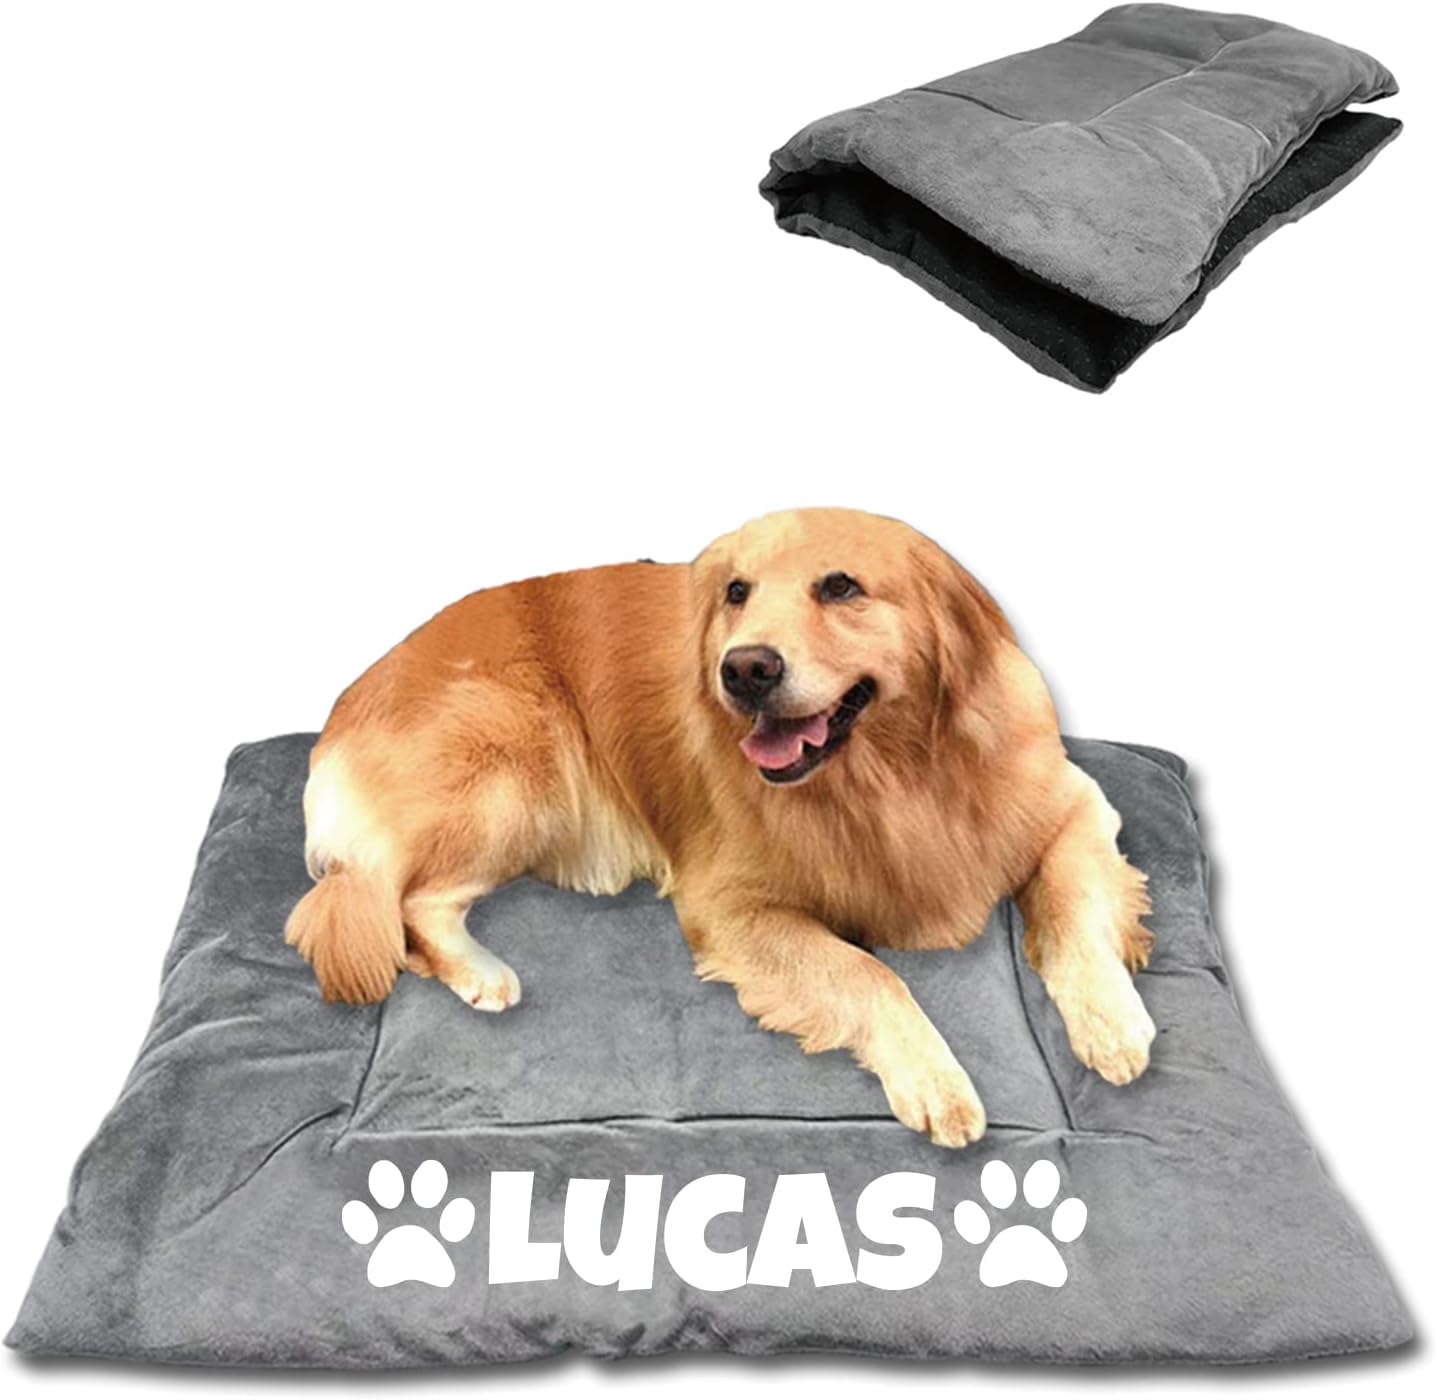 JMIPET Personalized Dog Bed